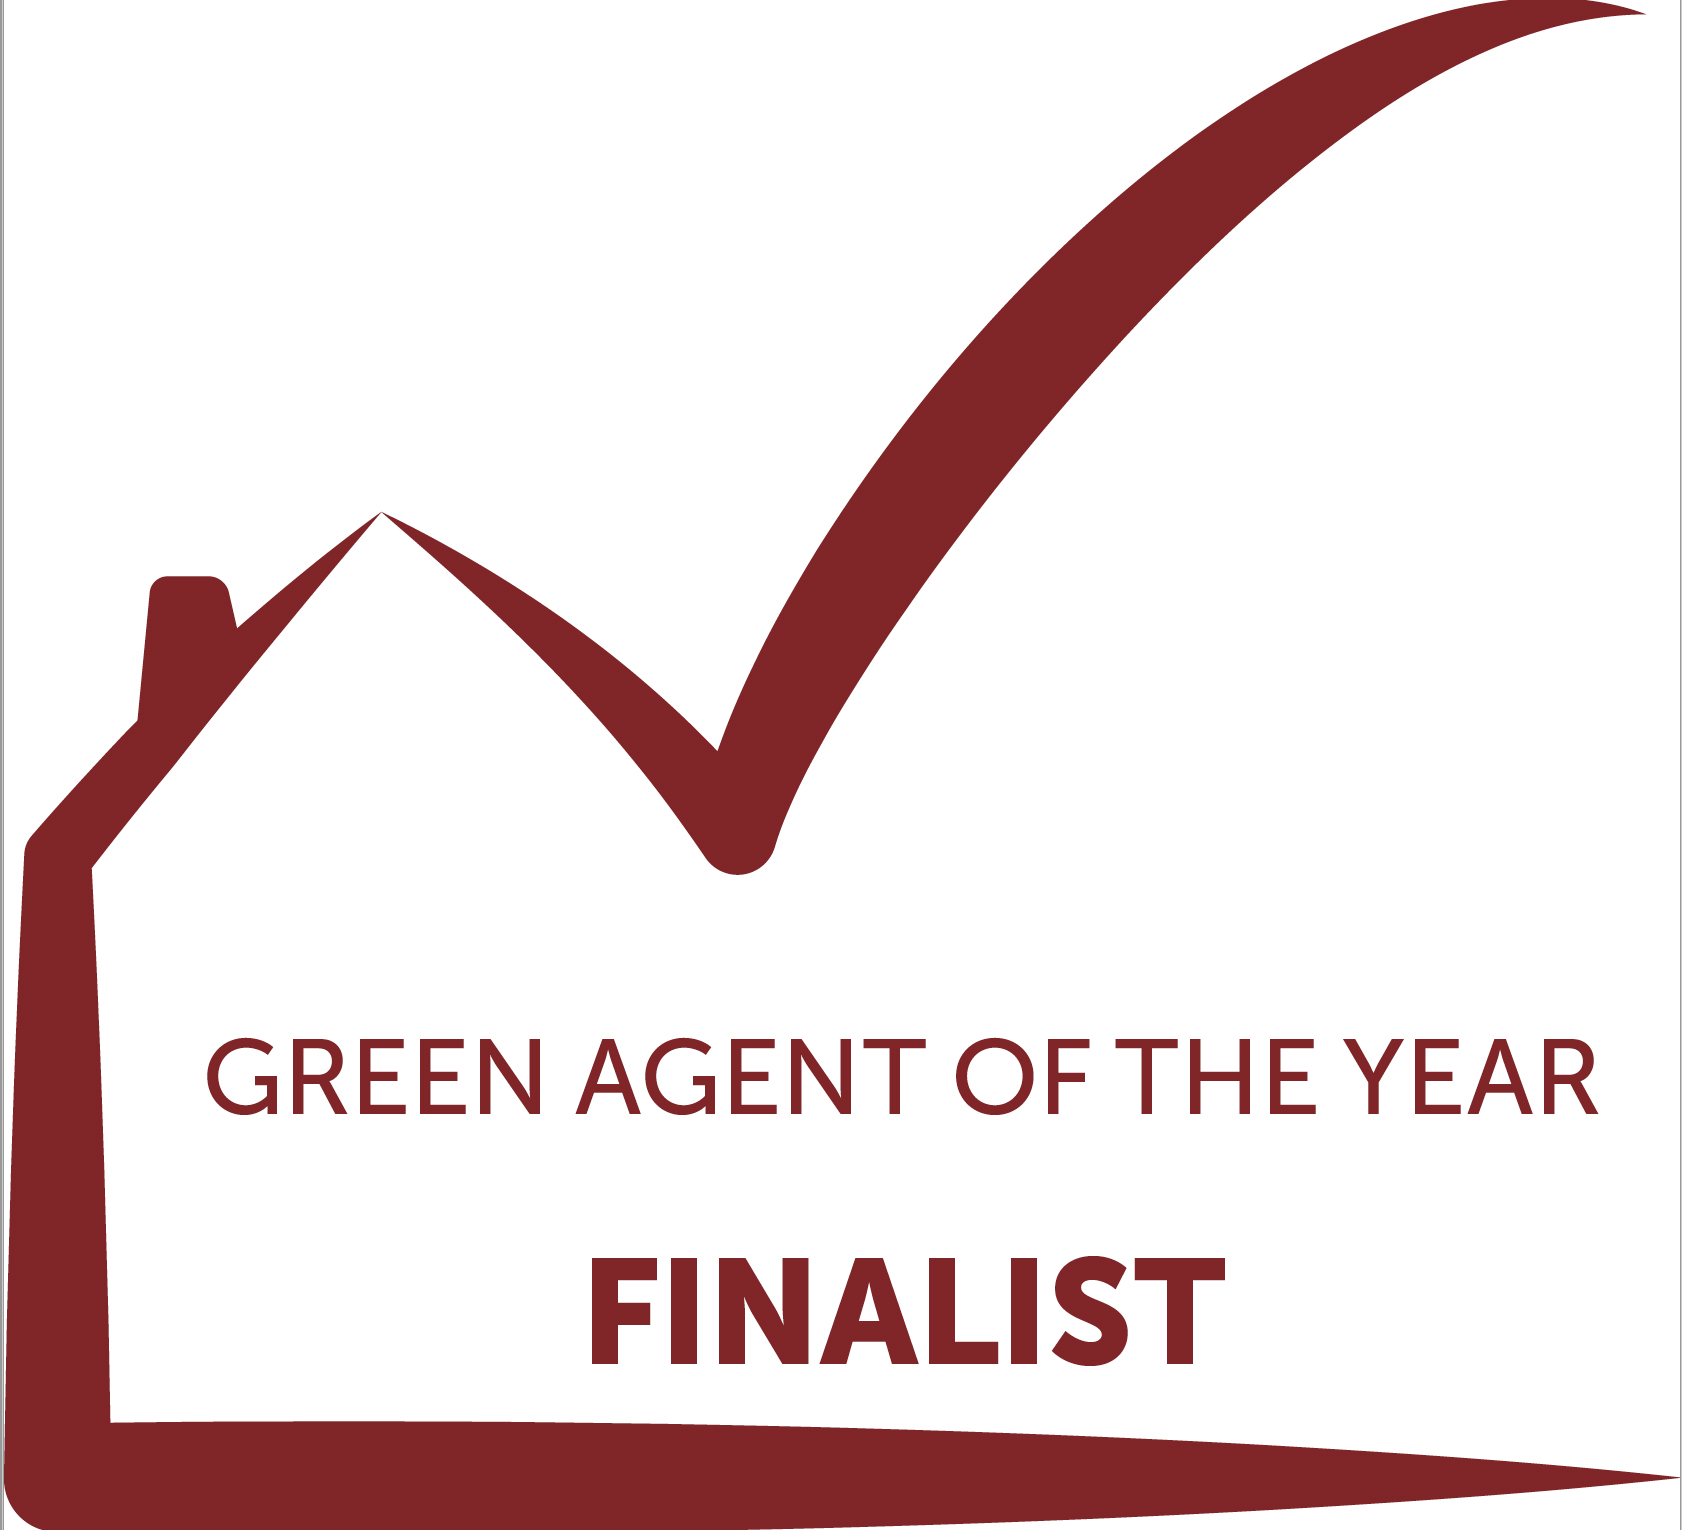 Green Agent of the Year Central Housing Group